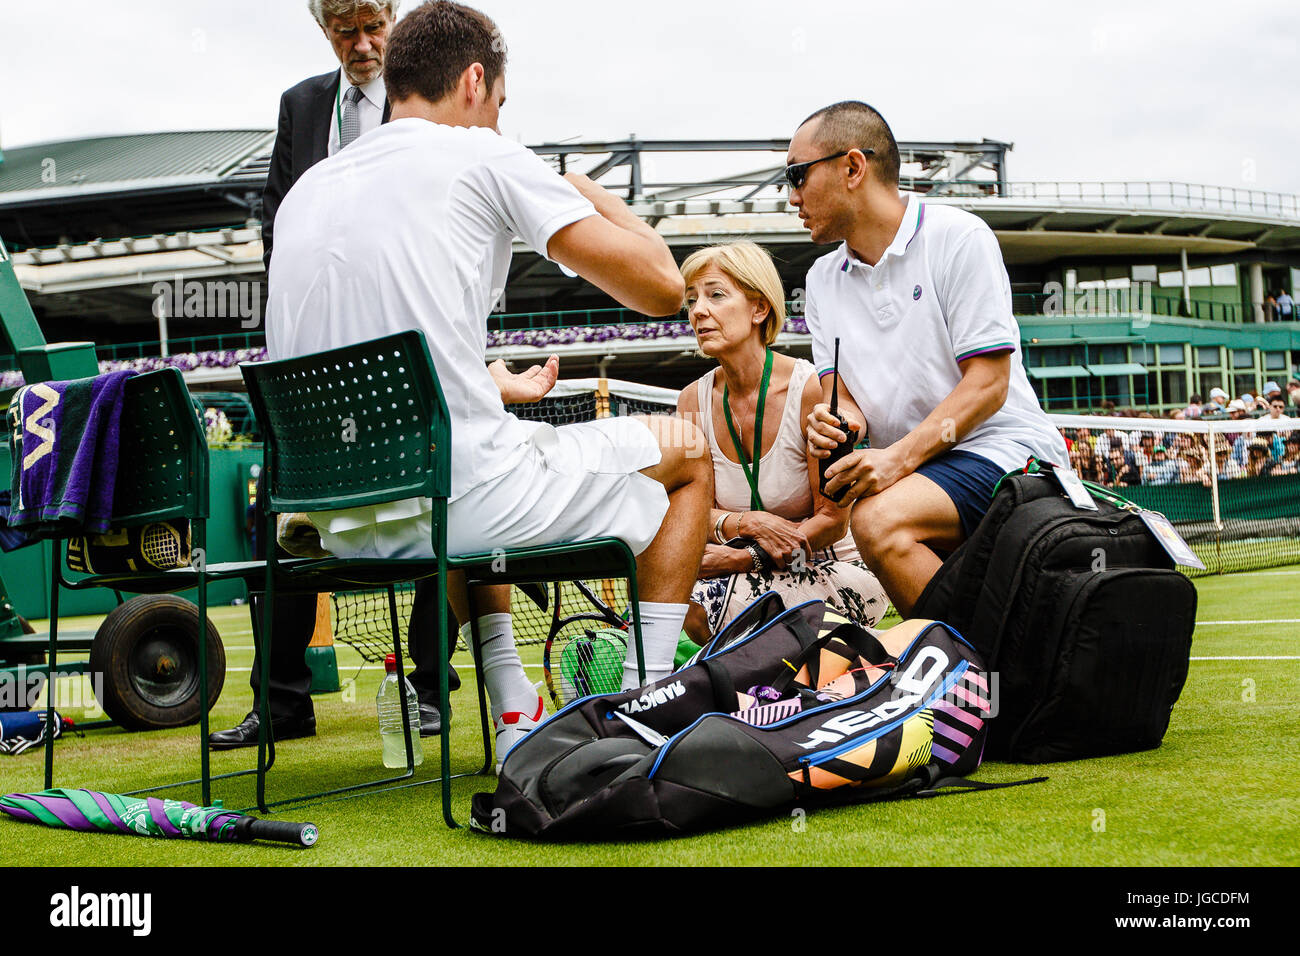 London, UK. 5th July, 2017. Australian tennis player Bernard Tomic said he couldn't 'find any motivation' during the Wimbledon Tennis Championships 2017 at the All England Lawn Tennis and Croquet Club in London. Credit: Frank Molter/Alamy Live News Stock Photo